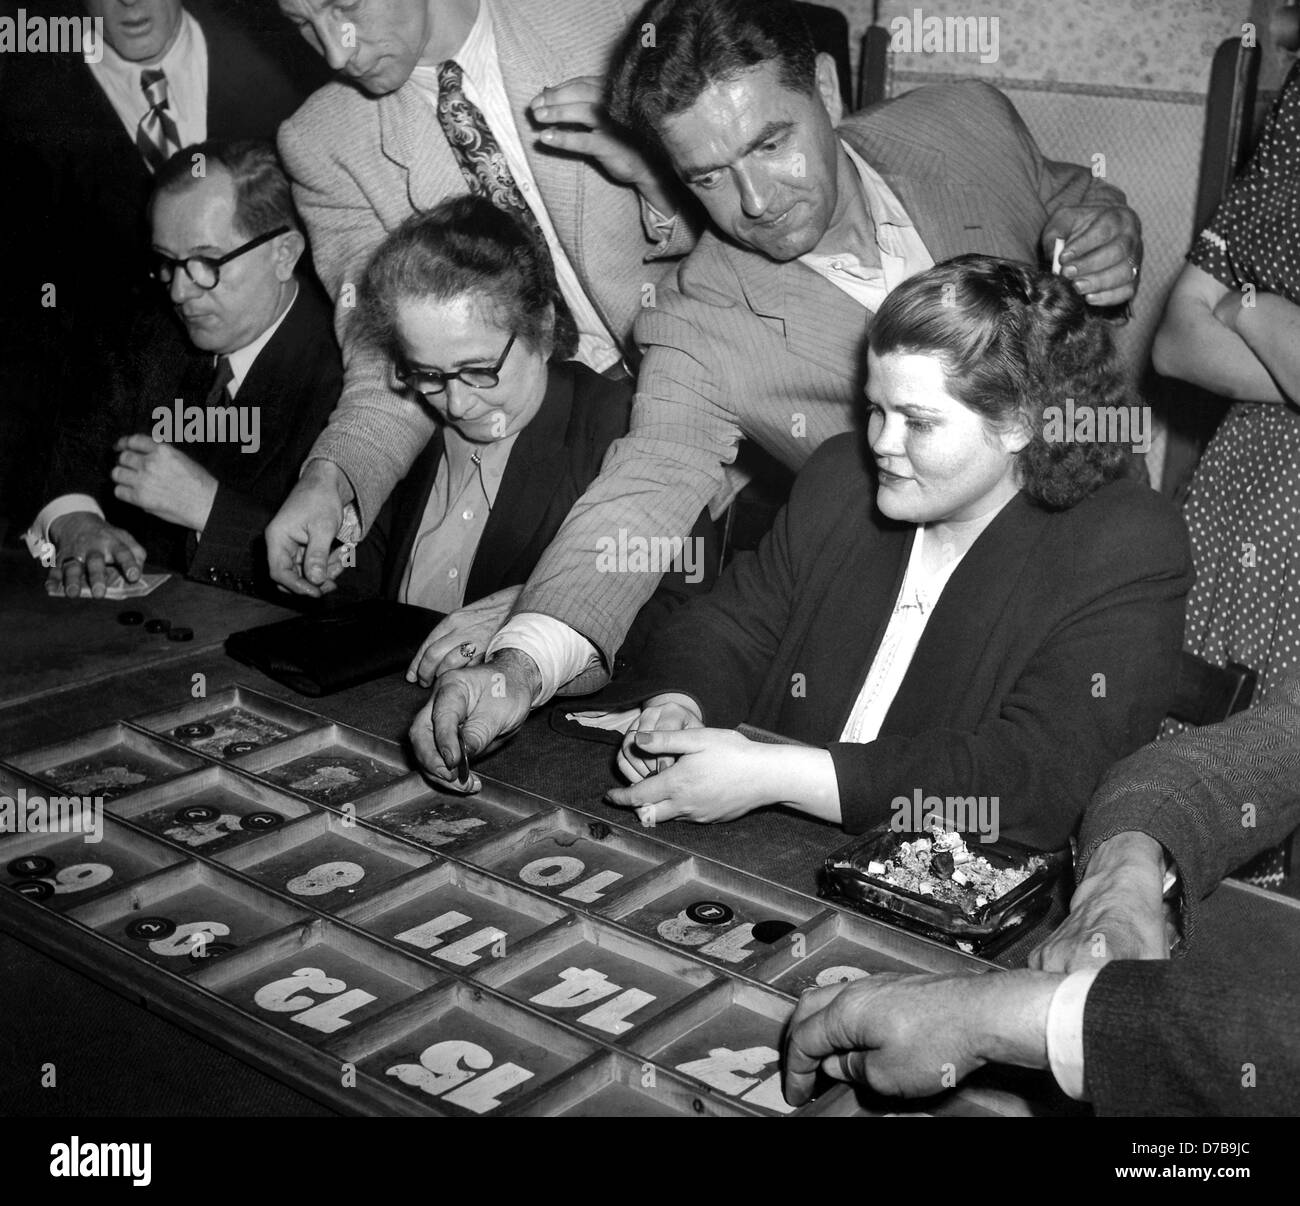 Players in a casino in Hamburg in the 1950s. Stock Photo